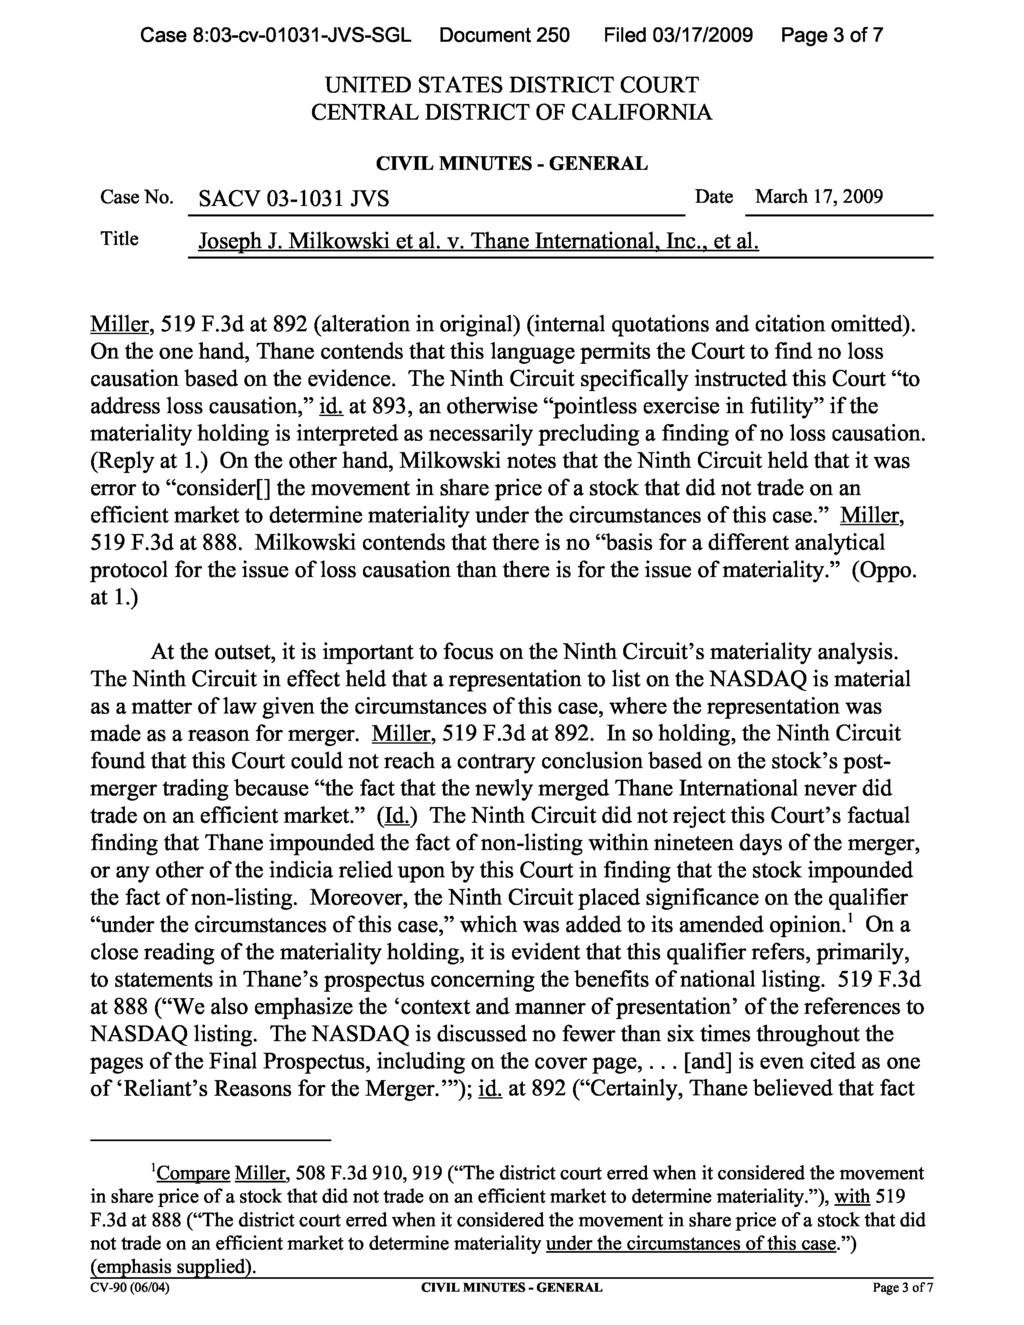 Case 8:03-cv-01031-JVS-SGL Document 250 Filed 03/17/2009 Page 3 of 7 Miller, 519 F.3d at 892 (alteration in original) (internal quotations and citation omitted).